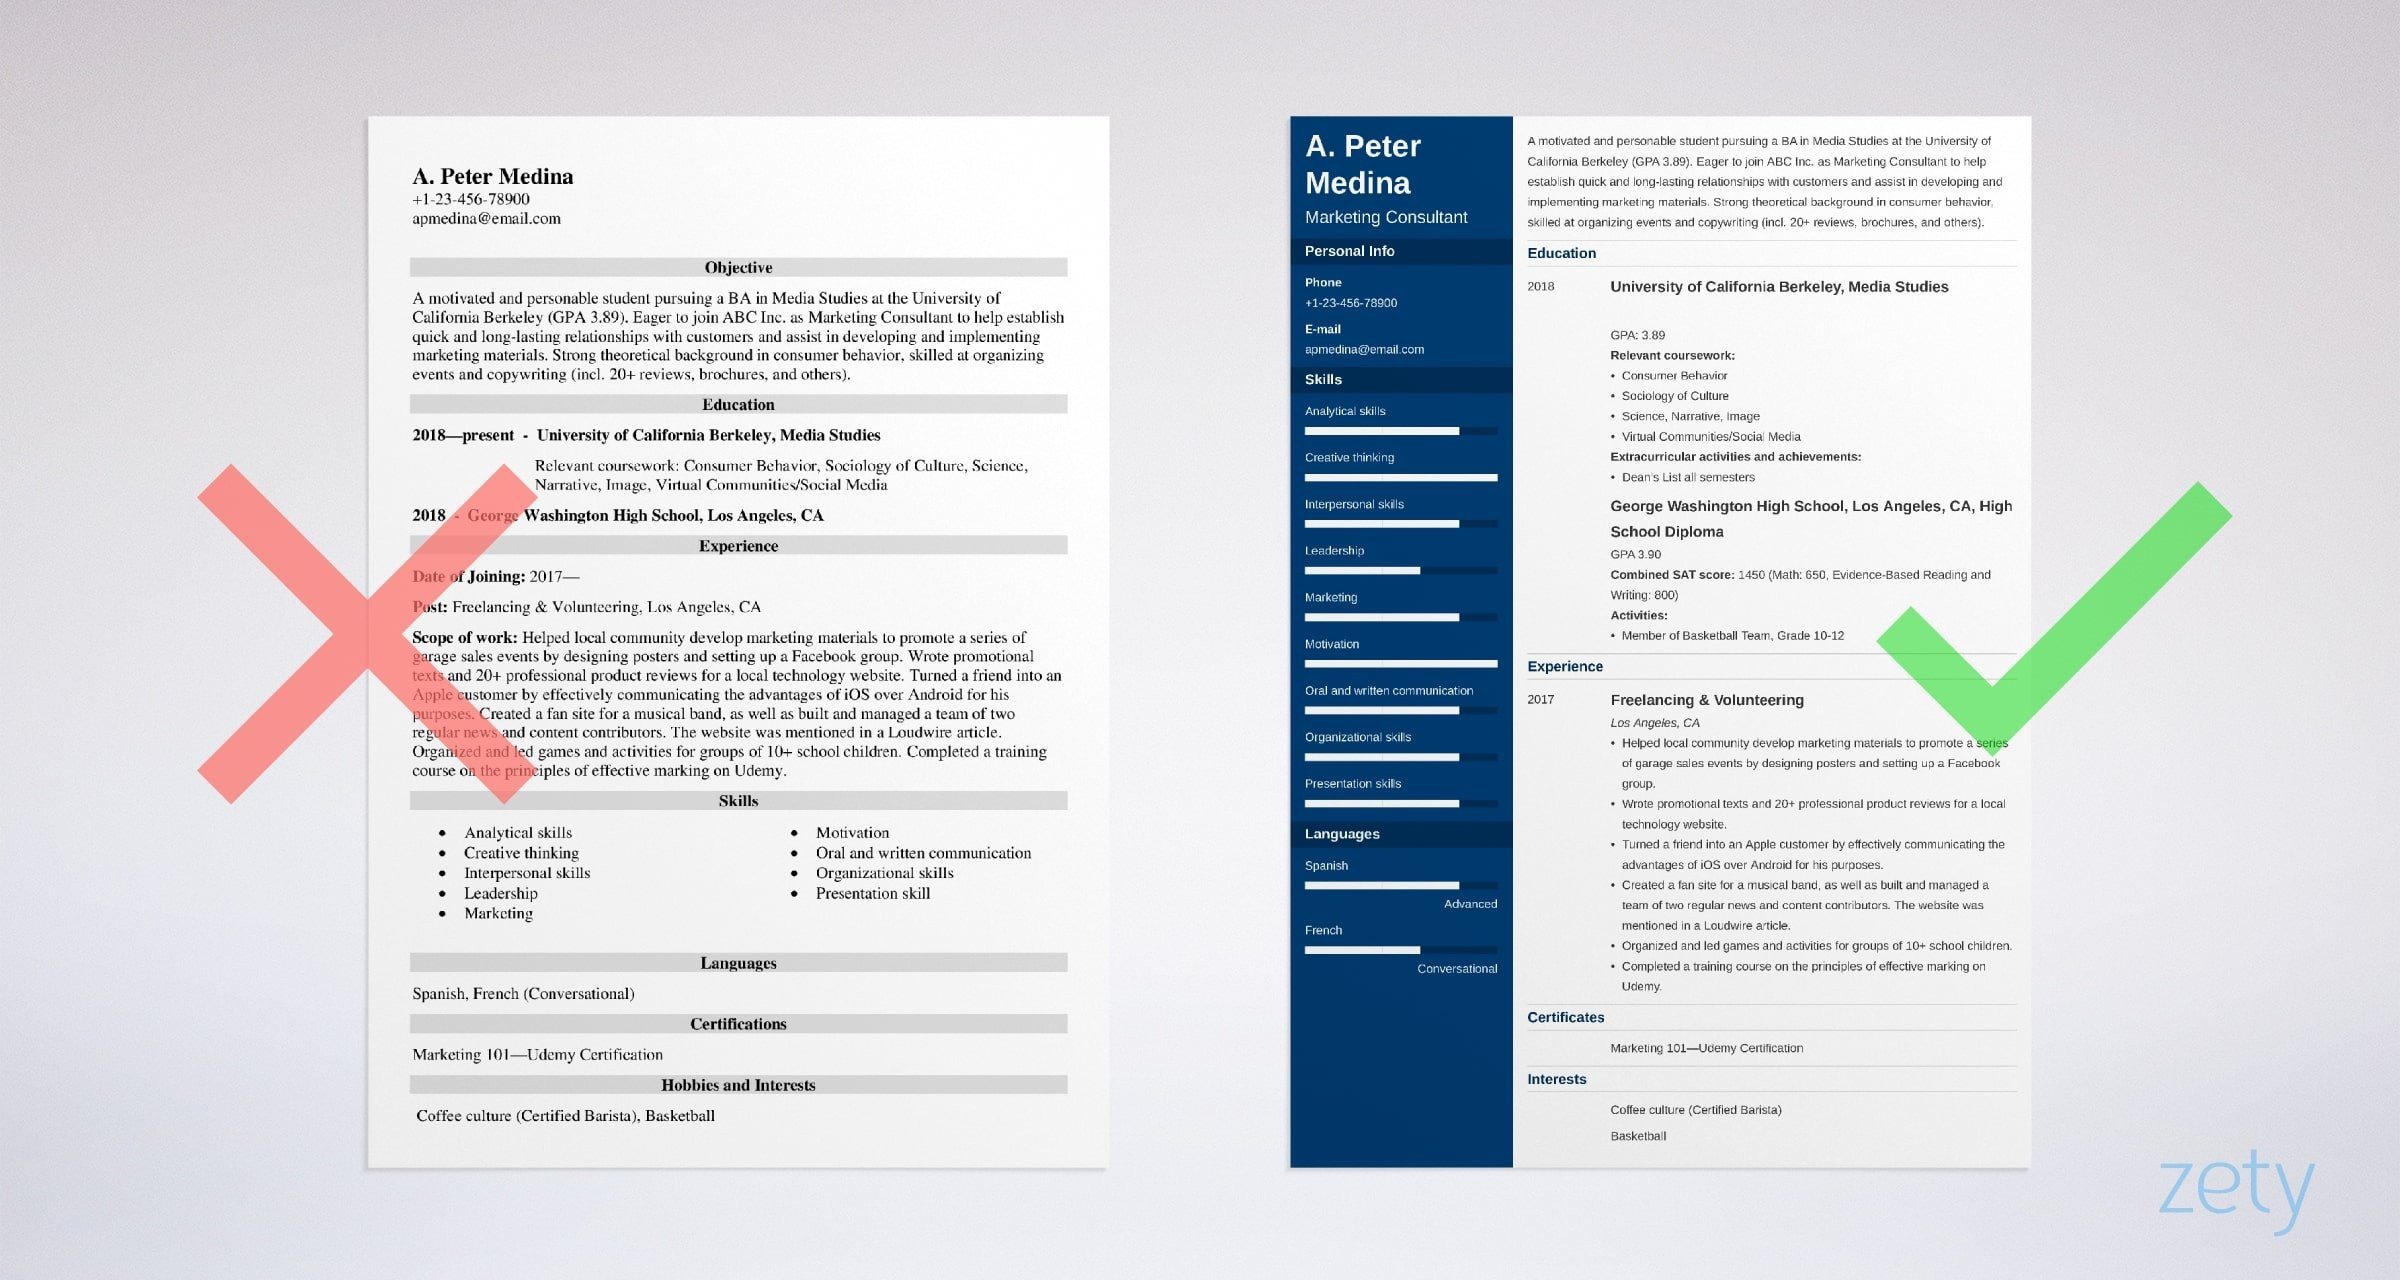 Entry Level Resume Samples College Graduate How to Make A Resume with No Experience: First Job Examples